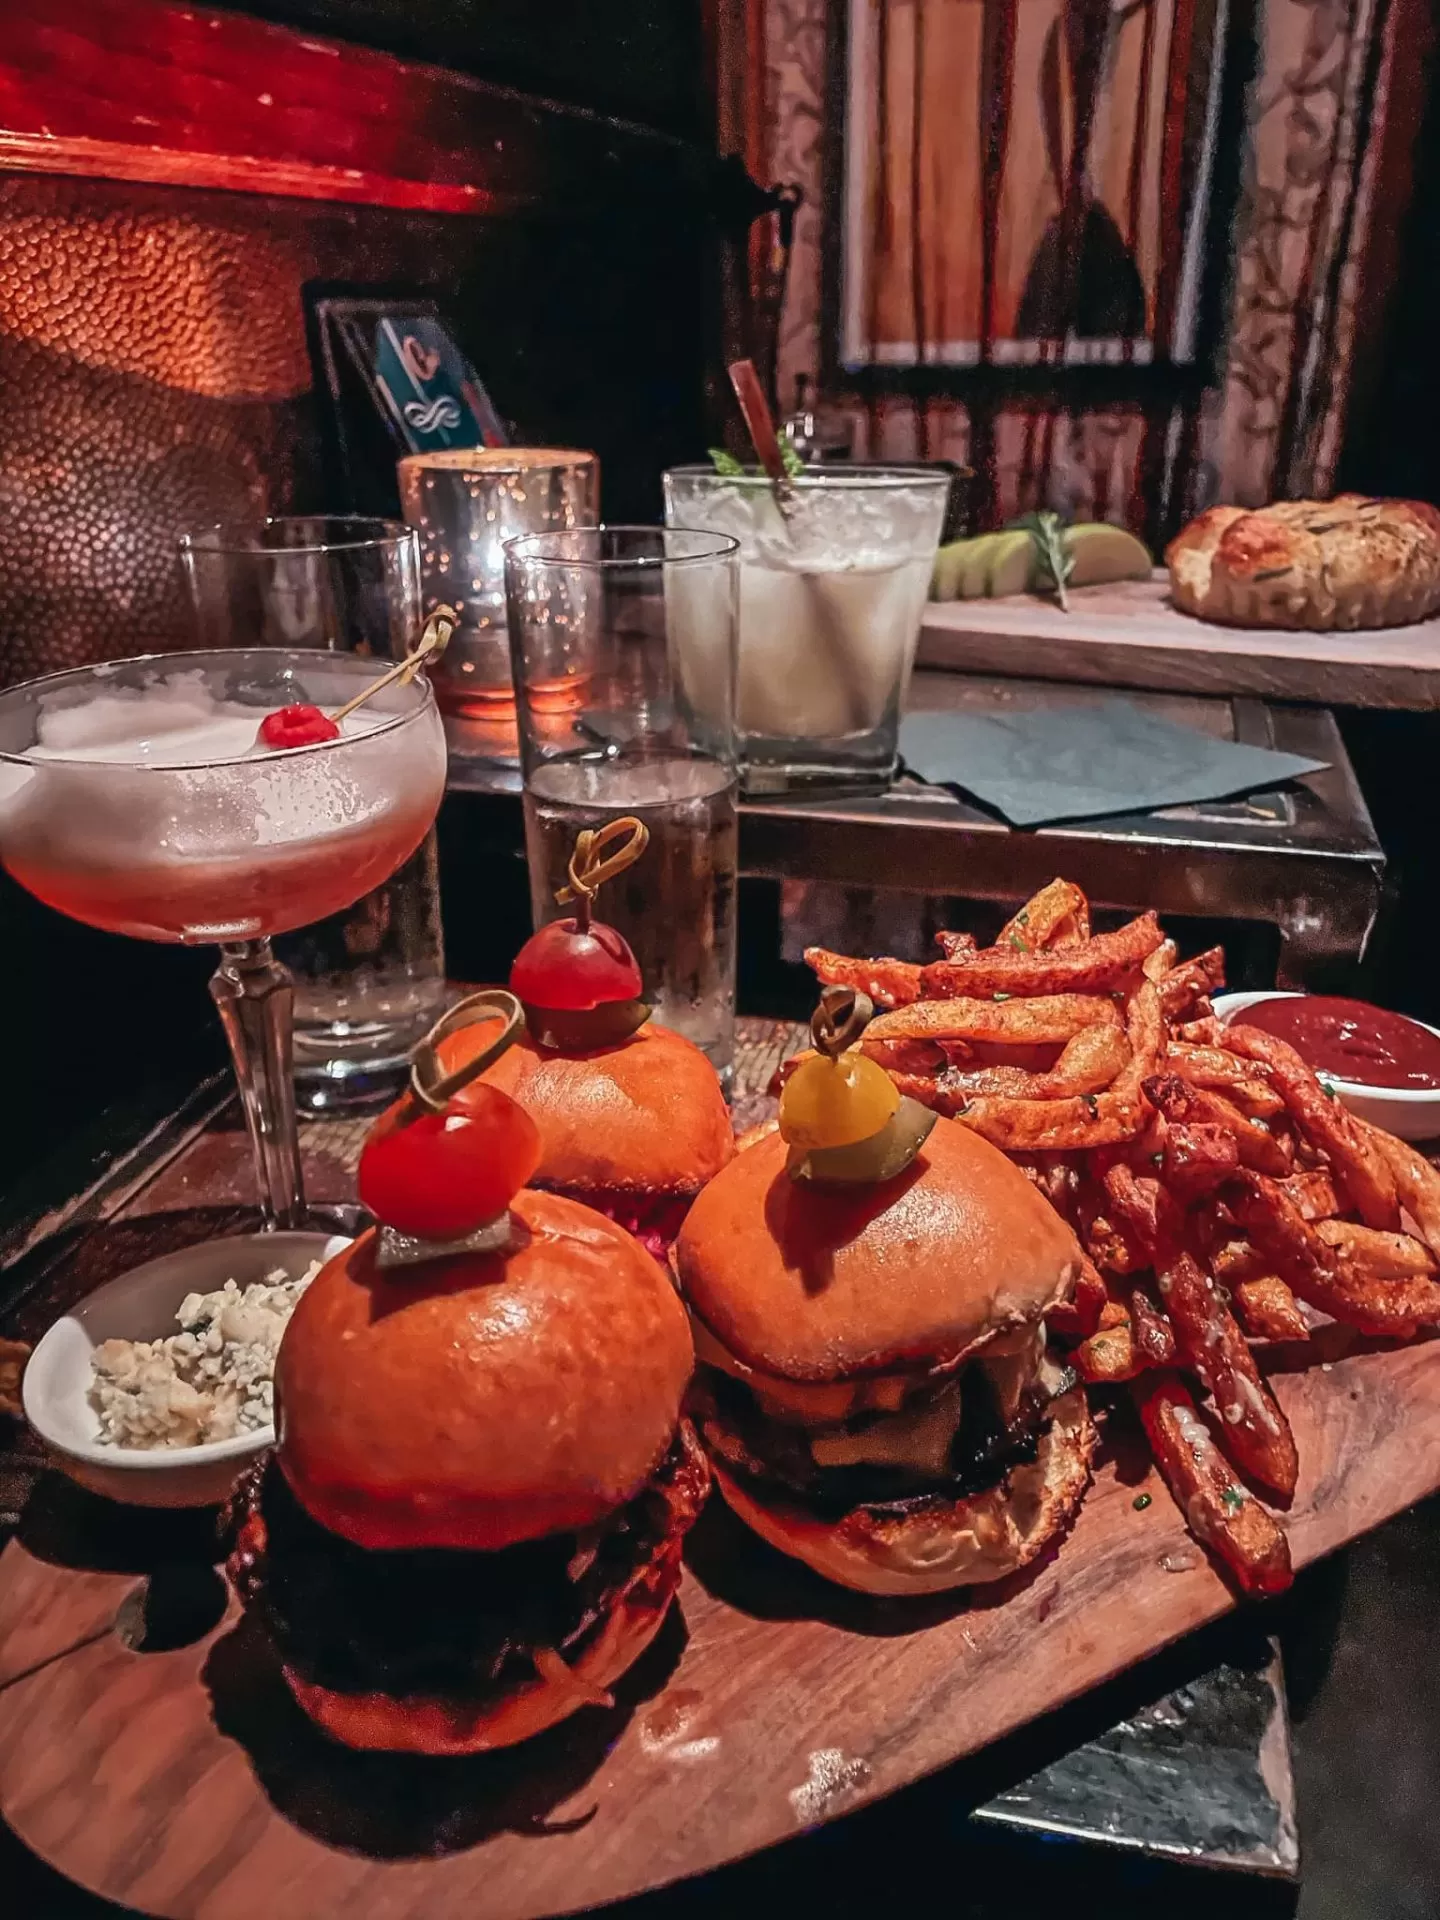 Burger trio and duckfat fries with craft cocktails from Ciro's Speakeasy in Tampa